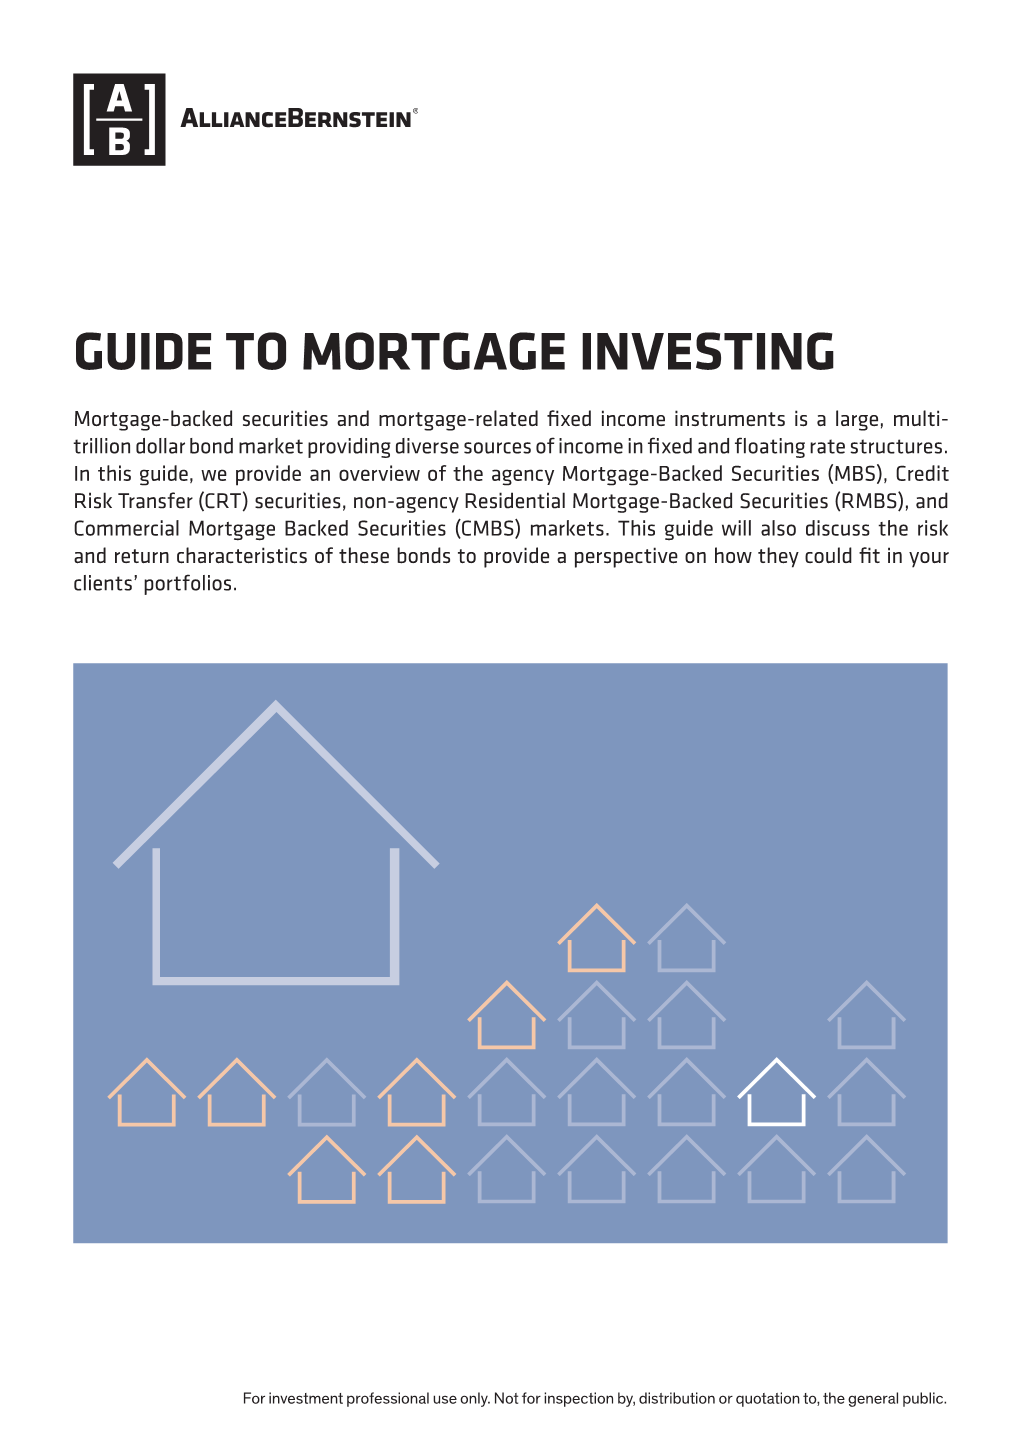 Guide to Mortgage Investing